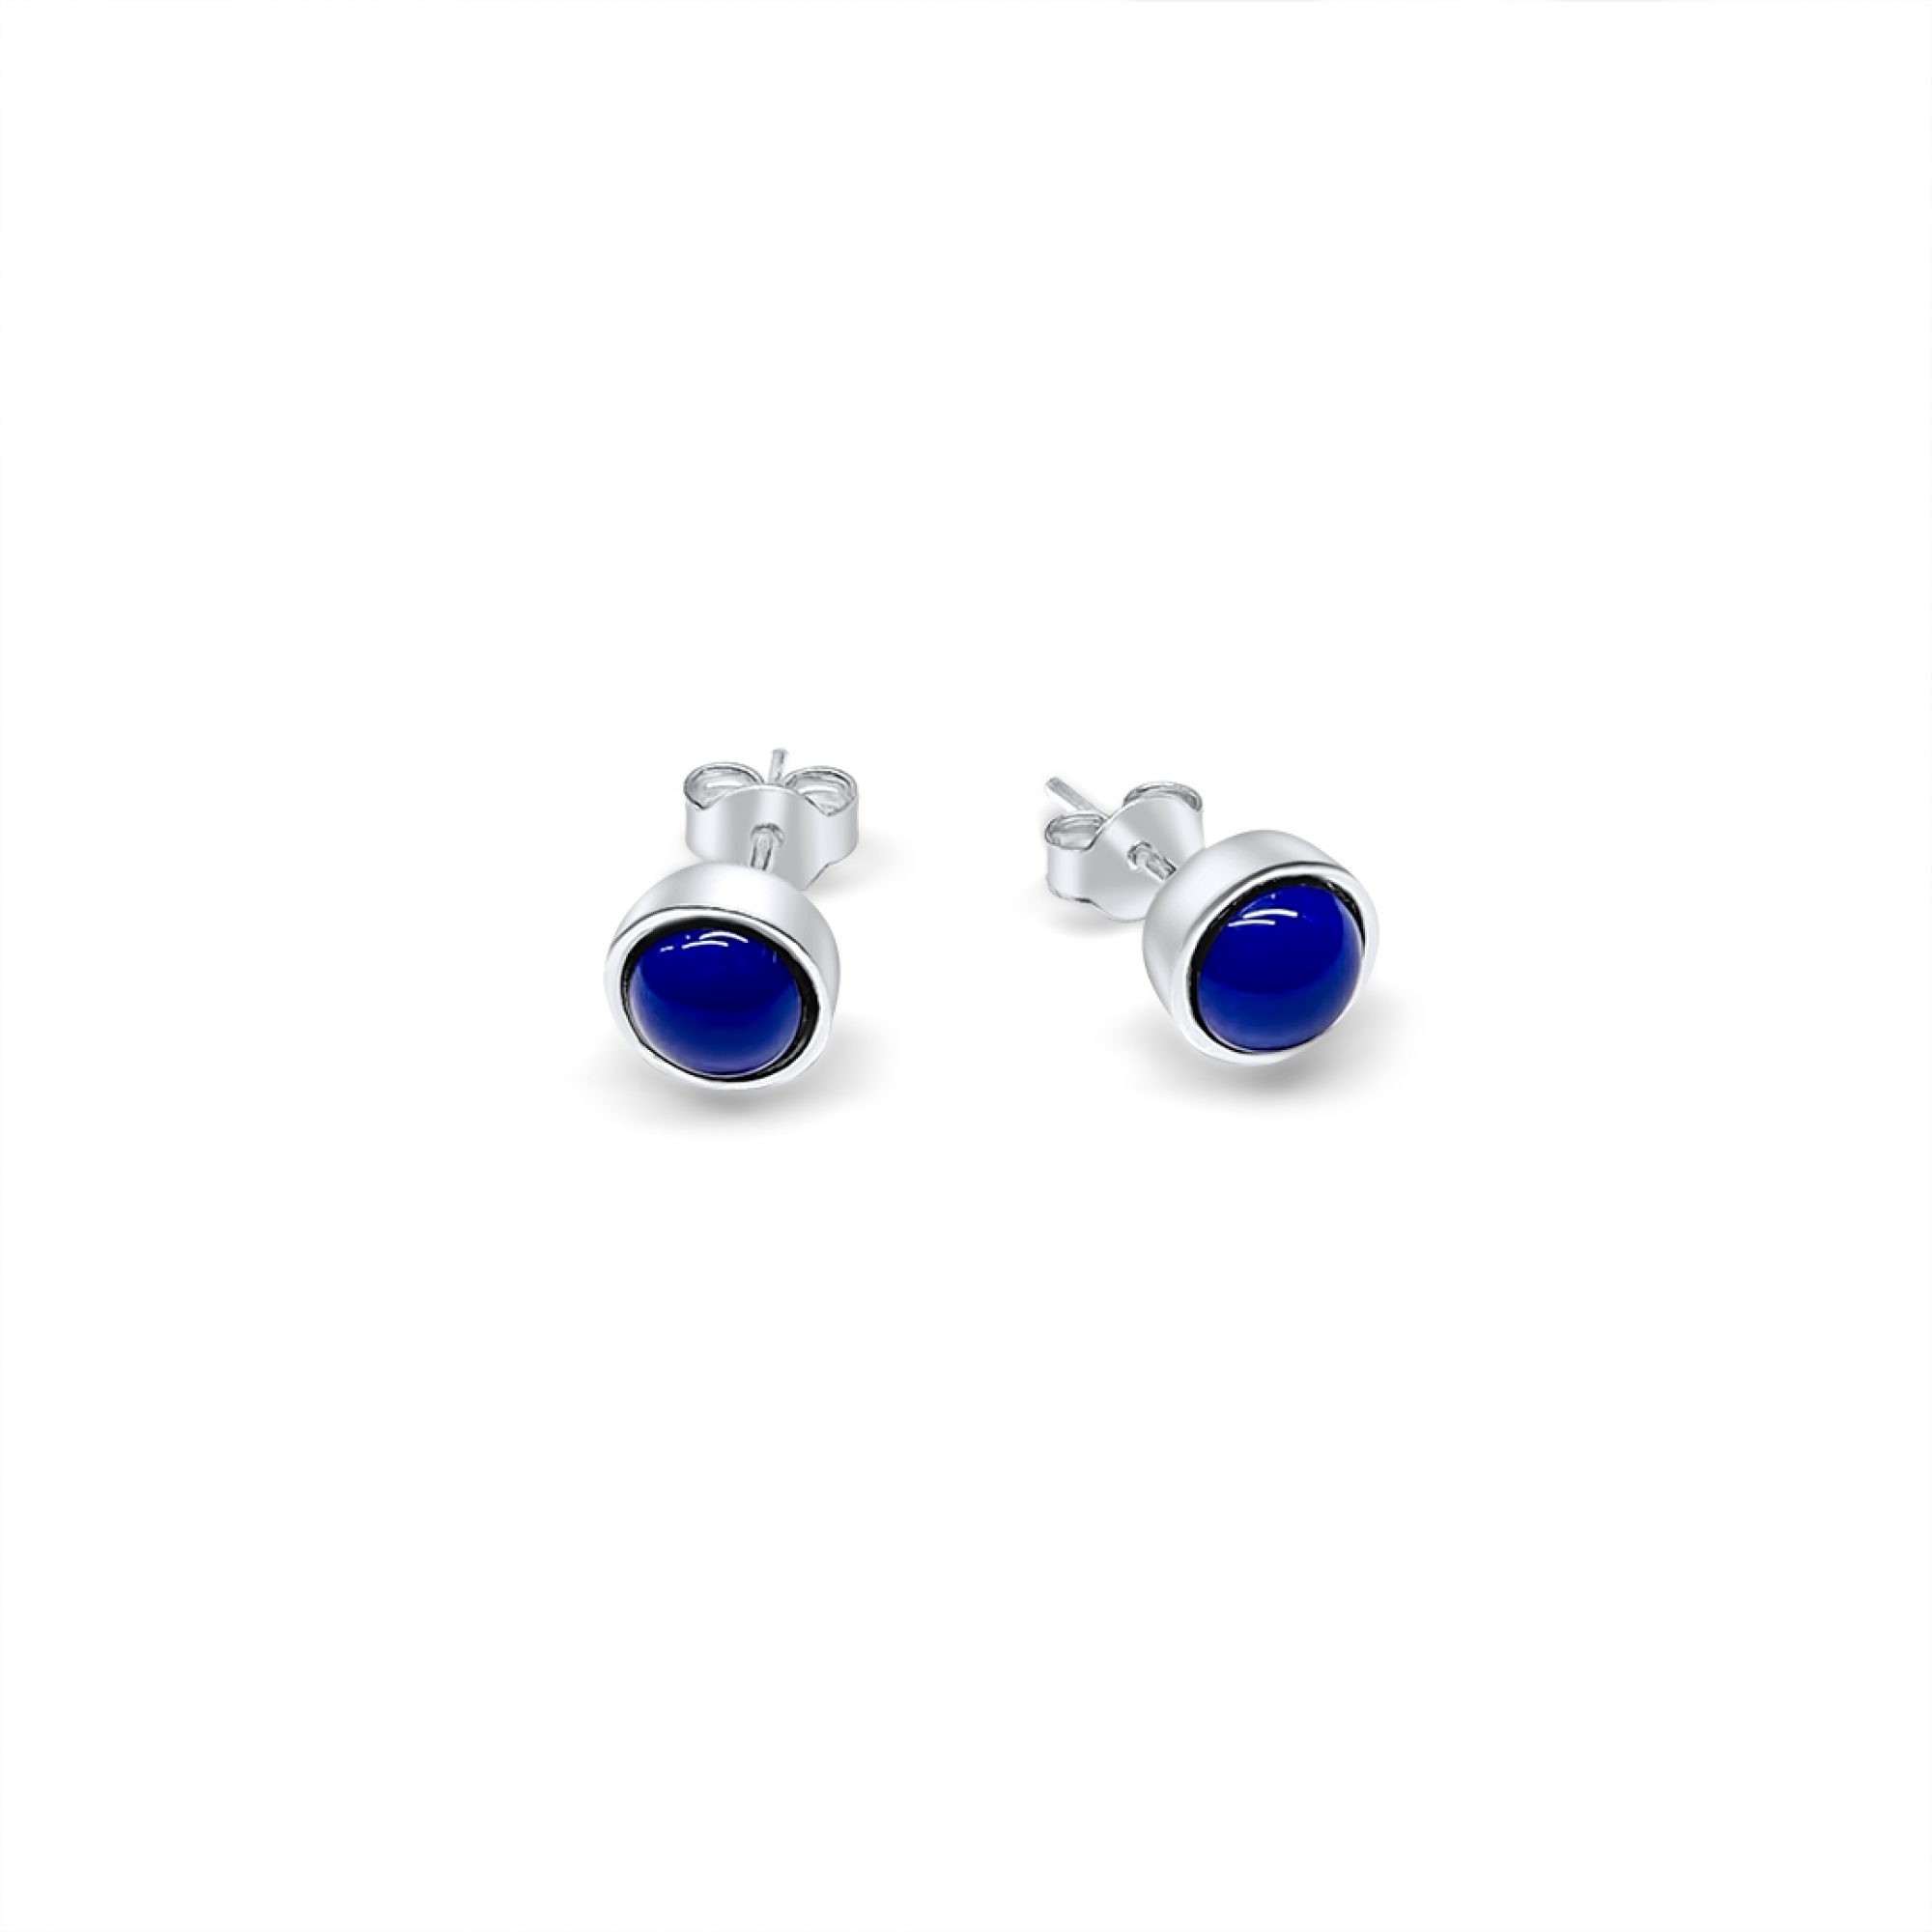 Silver stud earrings with lapis lazuli stones